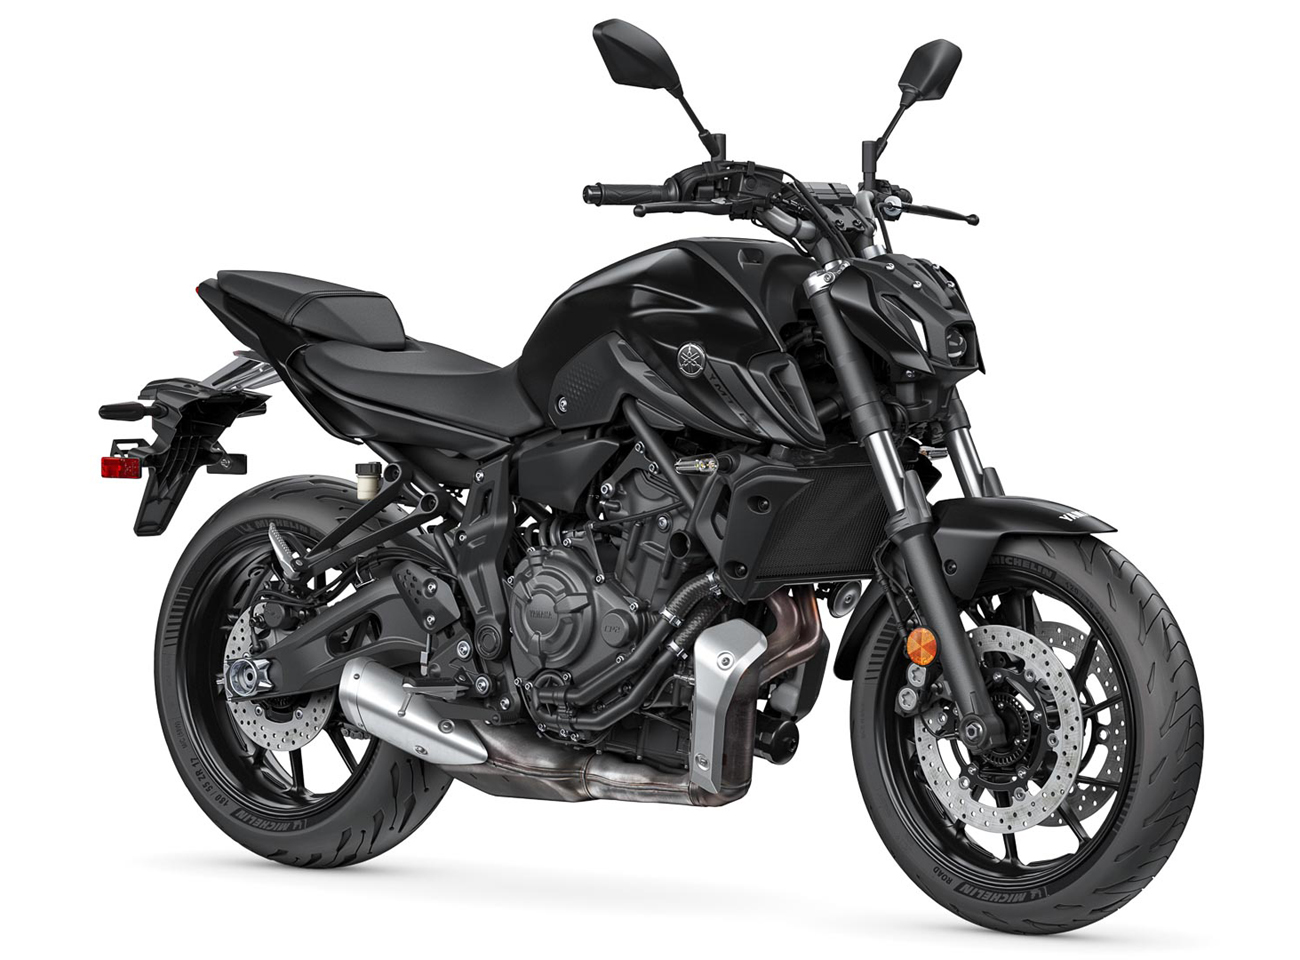 Yamaha MT-07 technical specifications